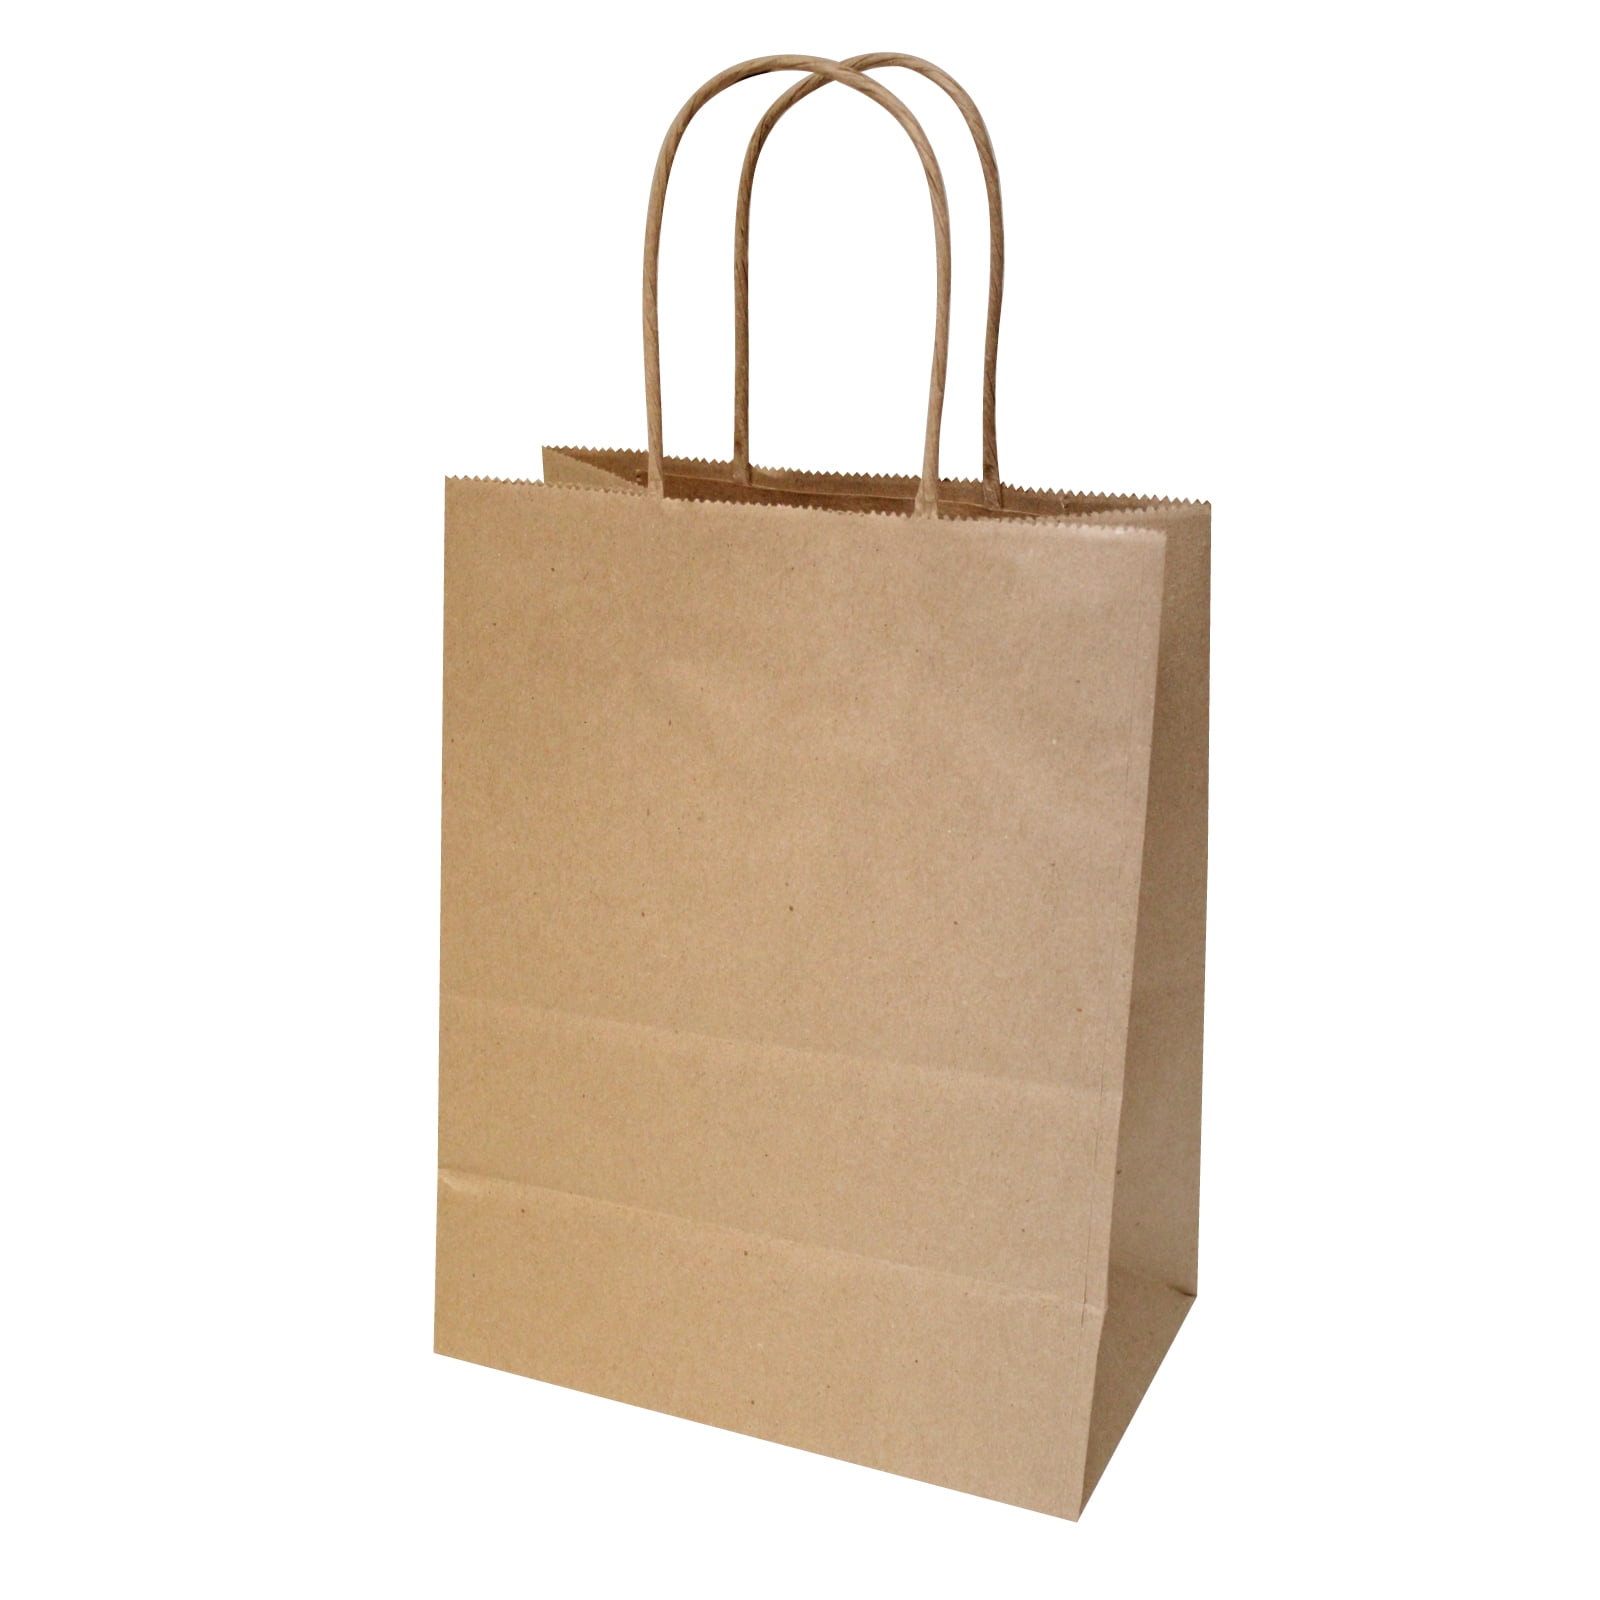 8 x 4.75 x 10.5 Colored Paper Shopping Bags 100/cs